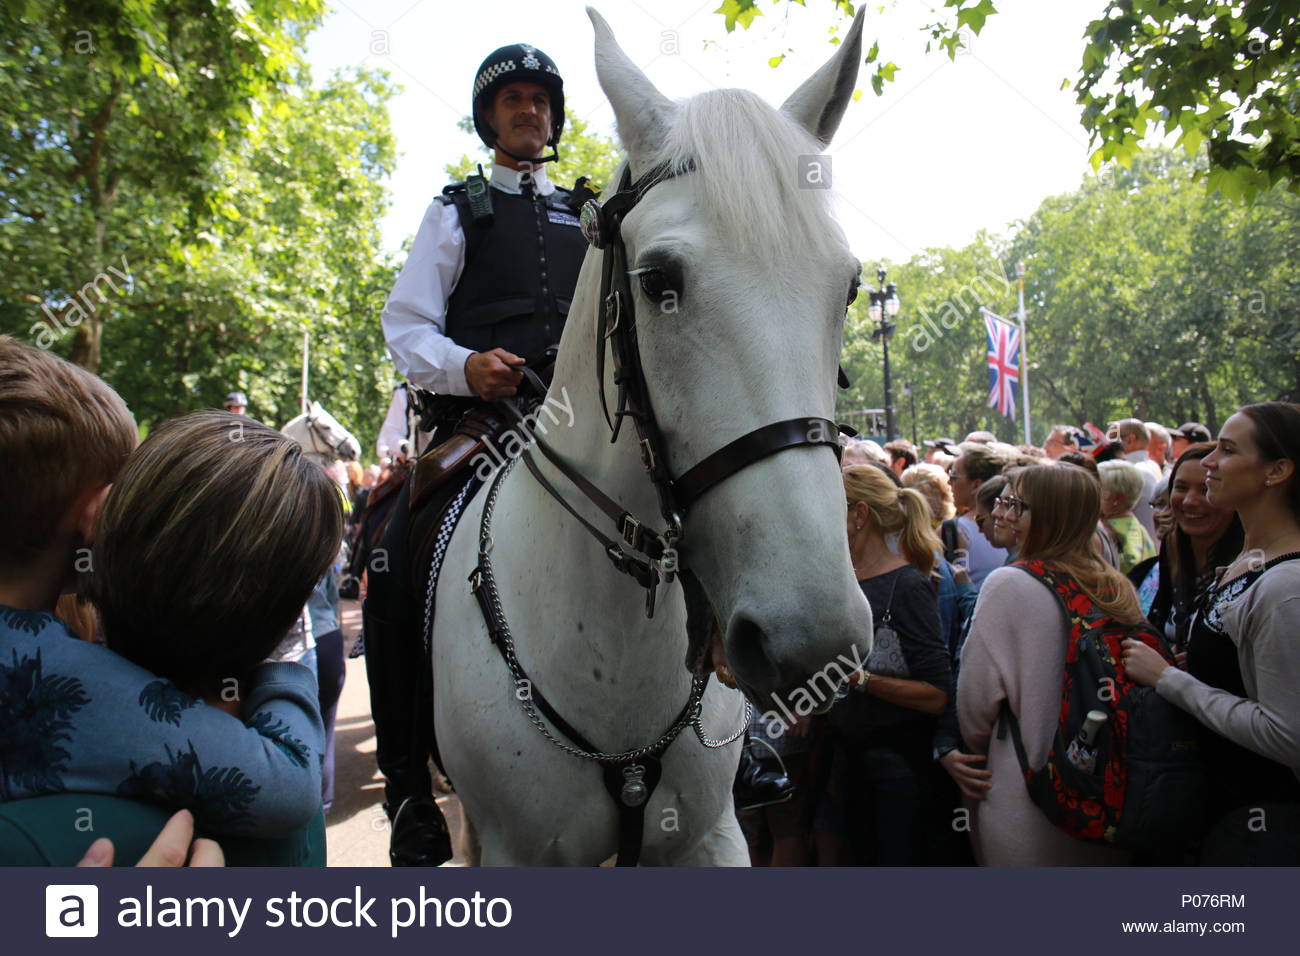 London, UK, 9 June 2018. The annual Trooping the Colour has taken place in London in honour of Queen Elizabeth's birthday. Thousands lined the streets to welcome Her Majesty and other members of the Royal Family as they travelled by coach from Buckingham Palace to Horse Guards Parade. Here a constable on horseback paves a way through the large crowd. Credit: Clearpix/Alamy Live News Stock Photo